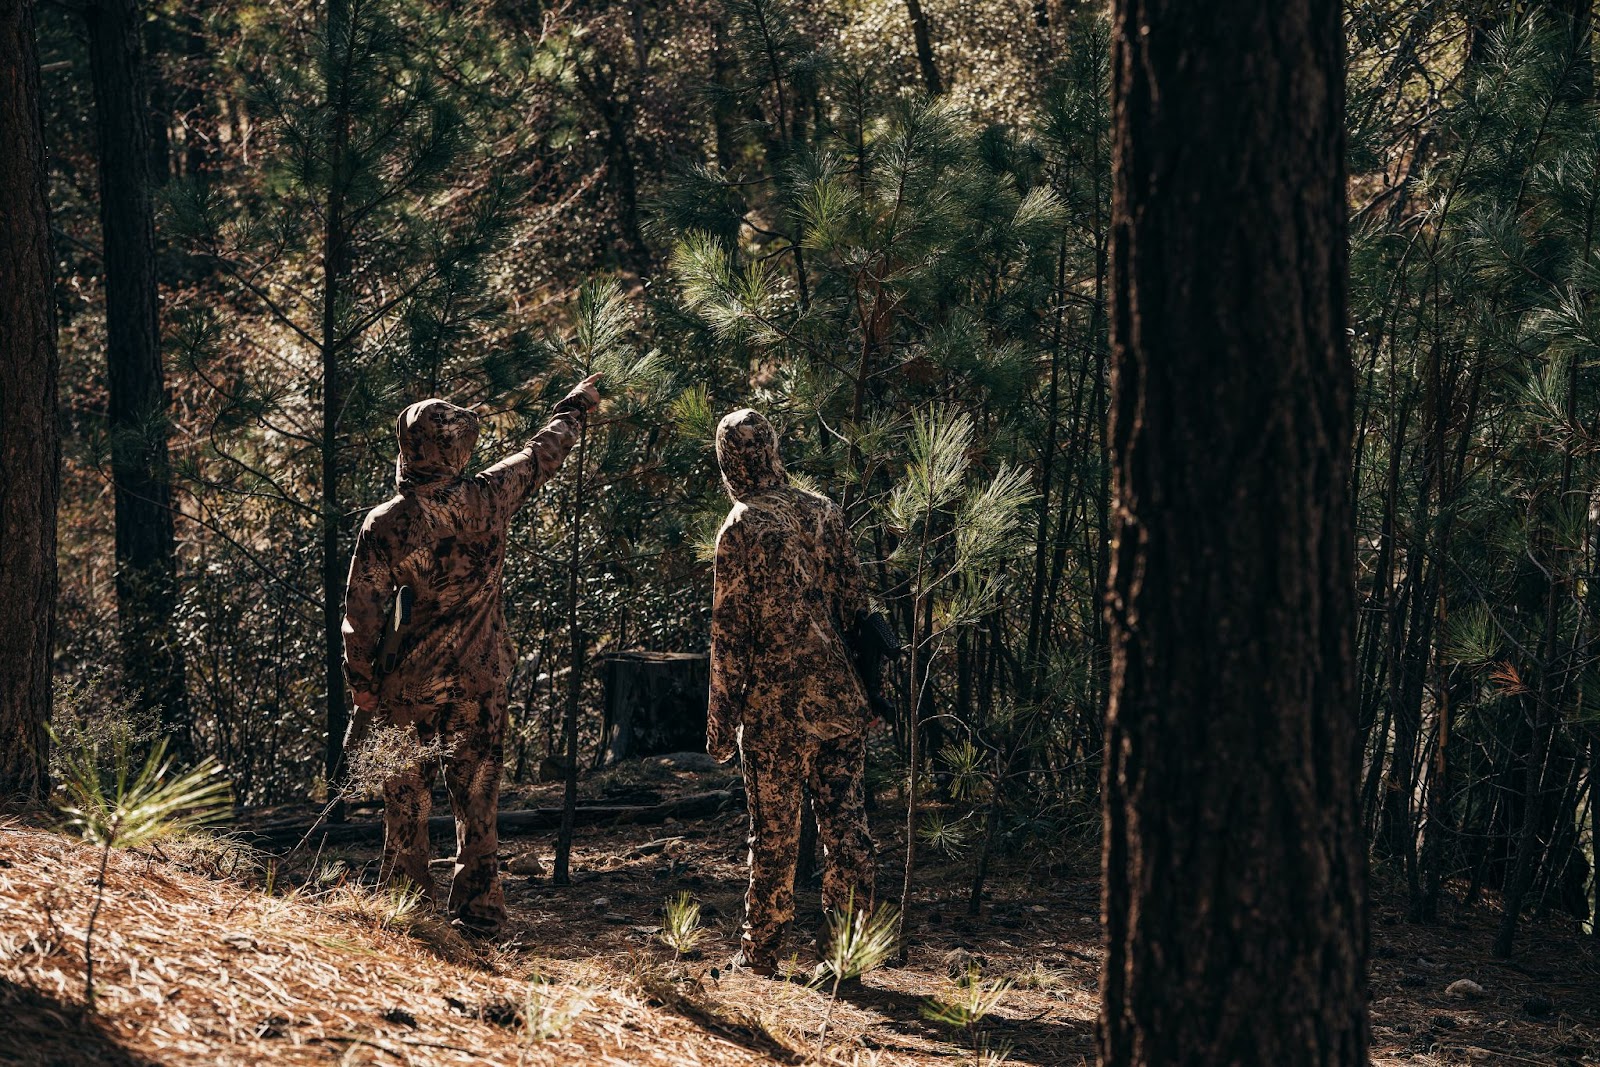 Two camo-clad hunters investigating their territory for prey.